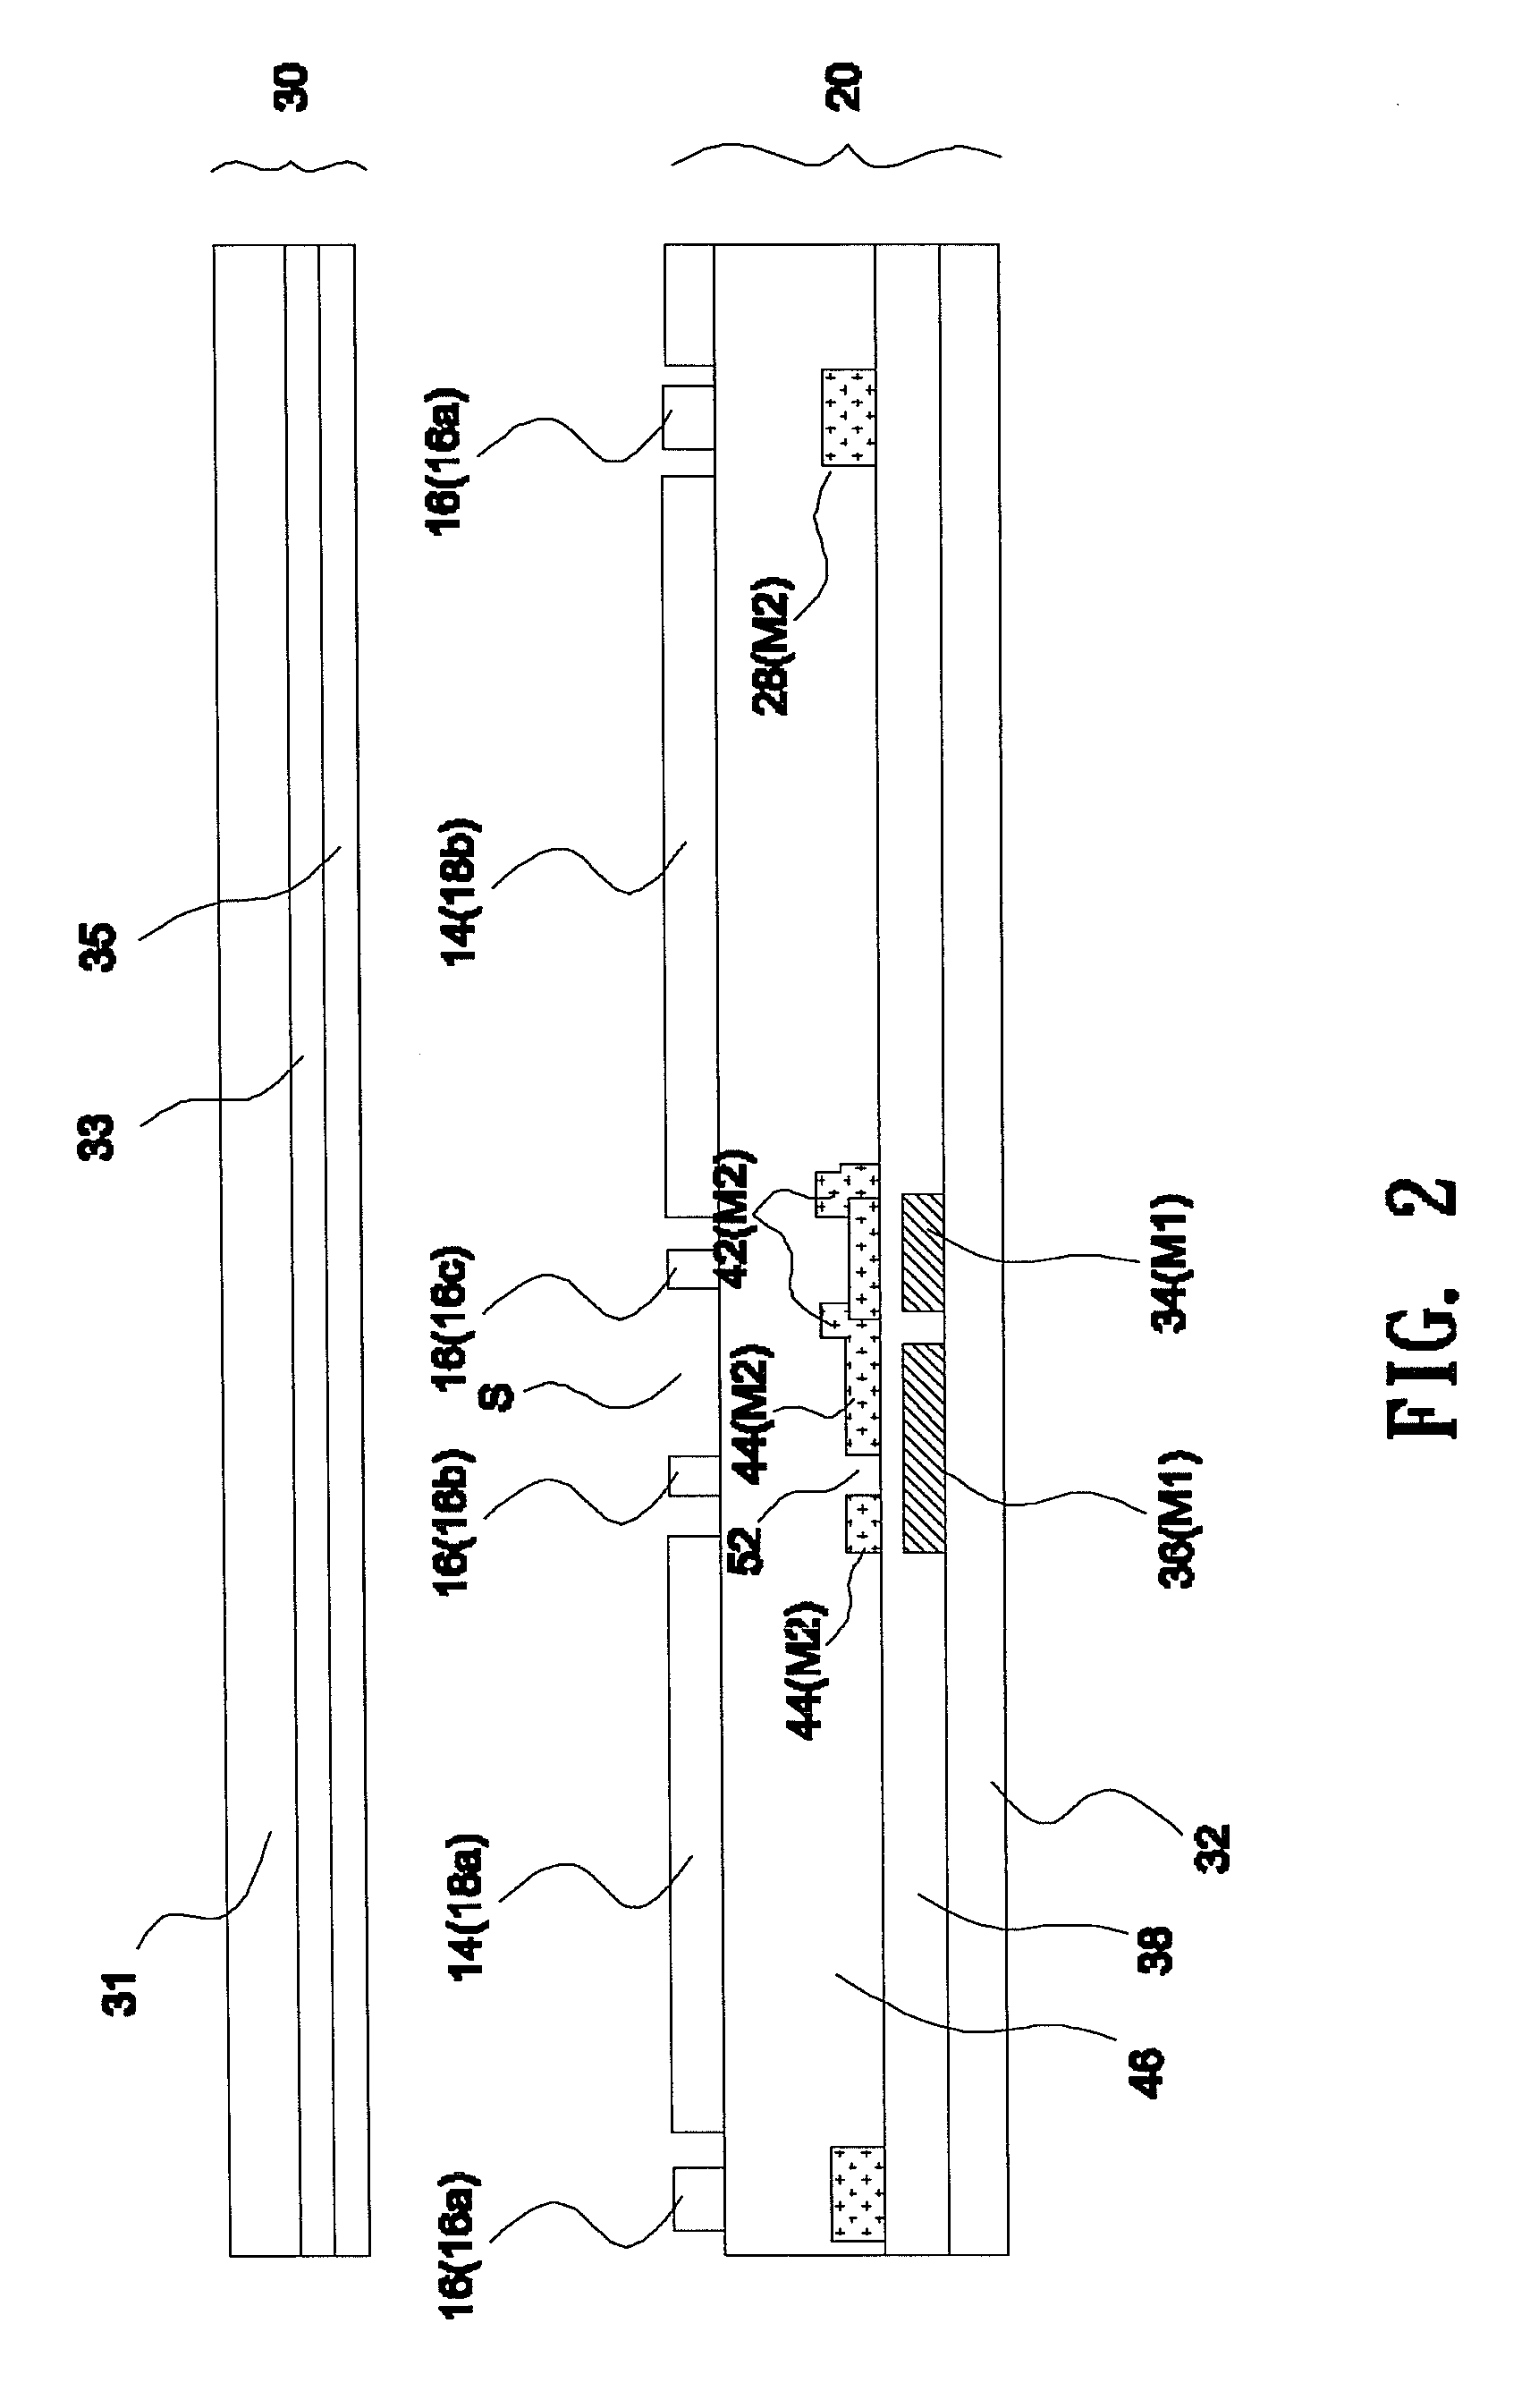 Multi-domain liquid crystal display and array substrate thereof comprising a storage capacitor having an auxiliary electrode controlled by a preceding scan line or signal line